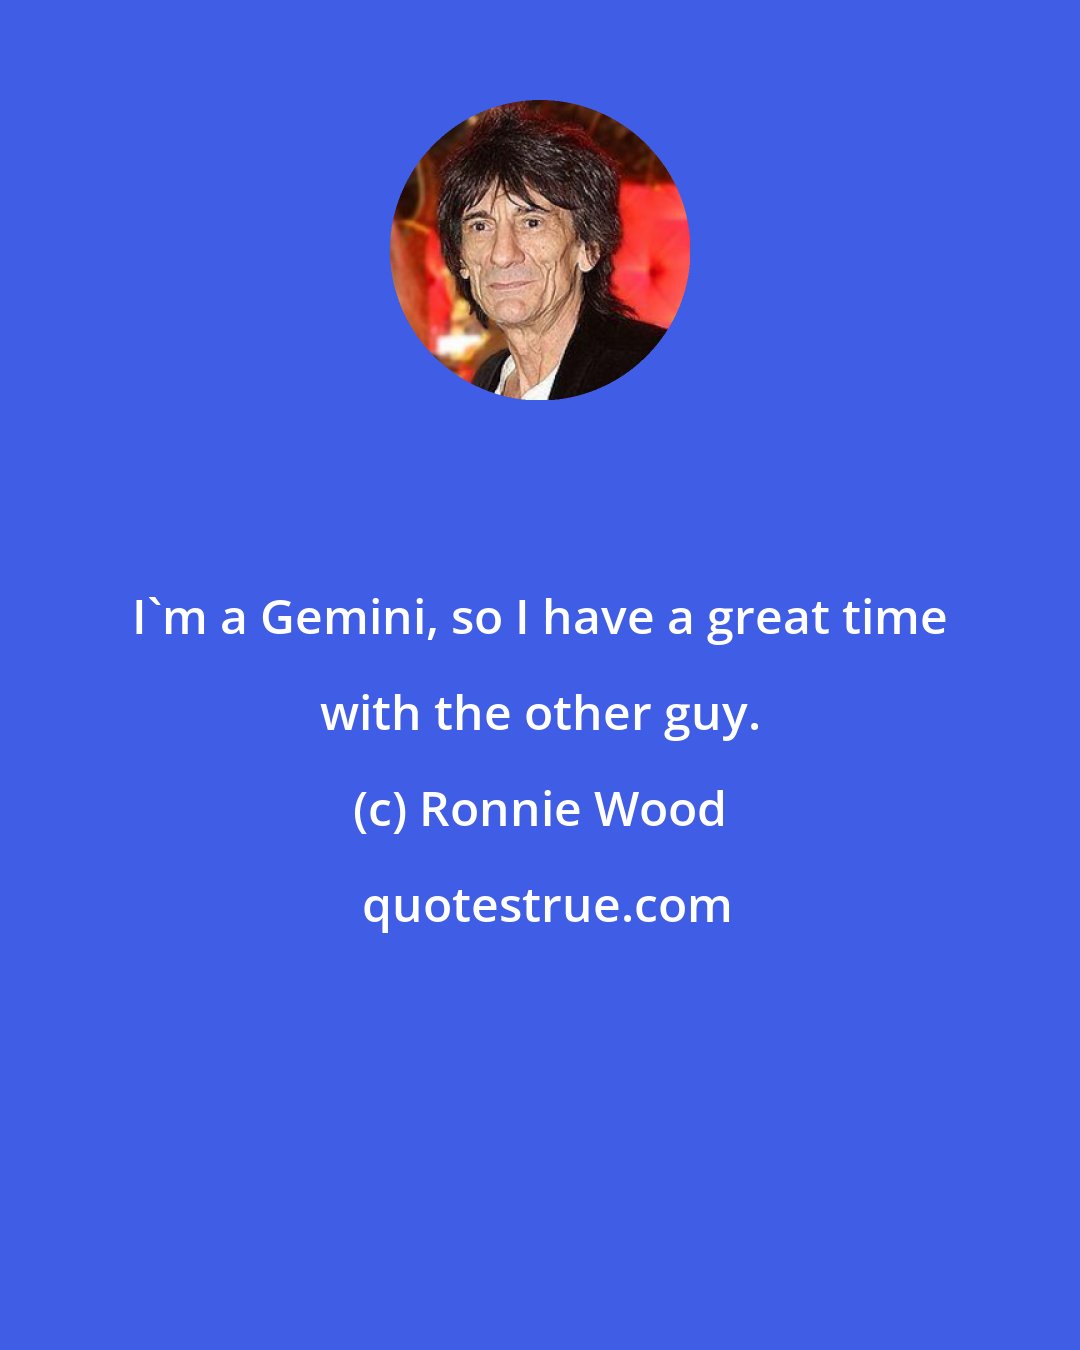 Ronnie Wood: I'm a Gemini, so I have a great time with the other guy.